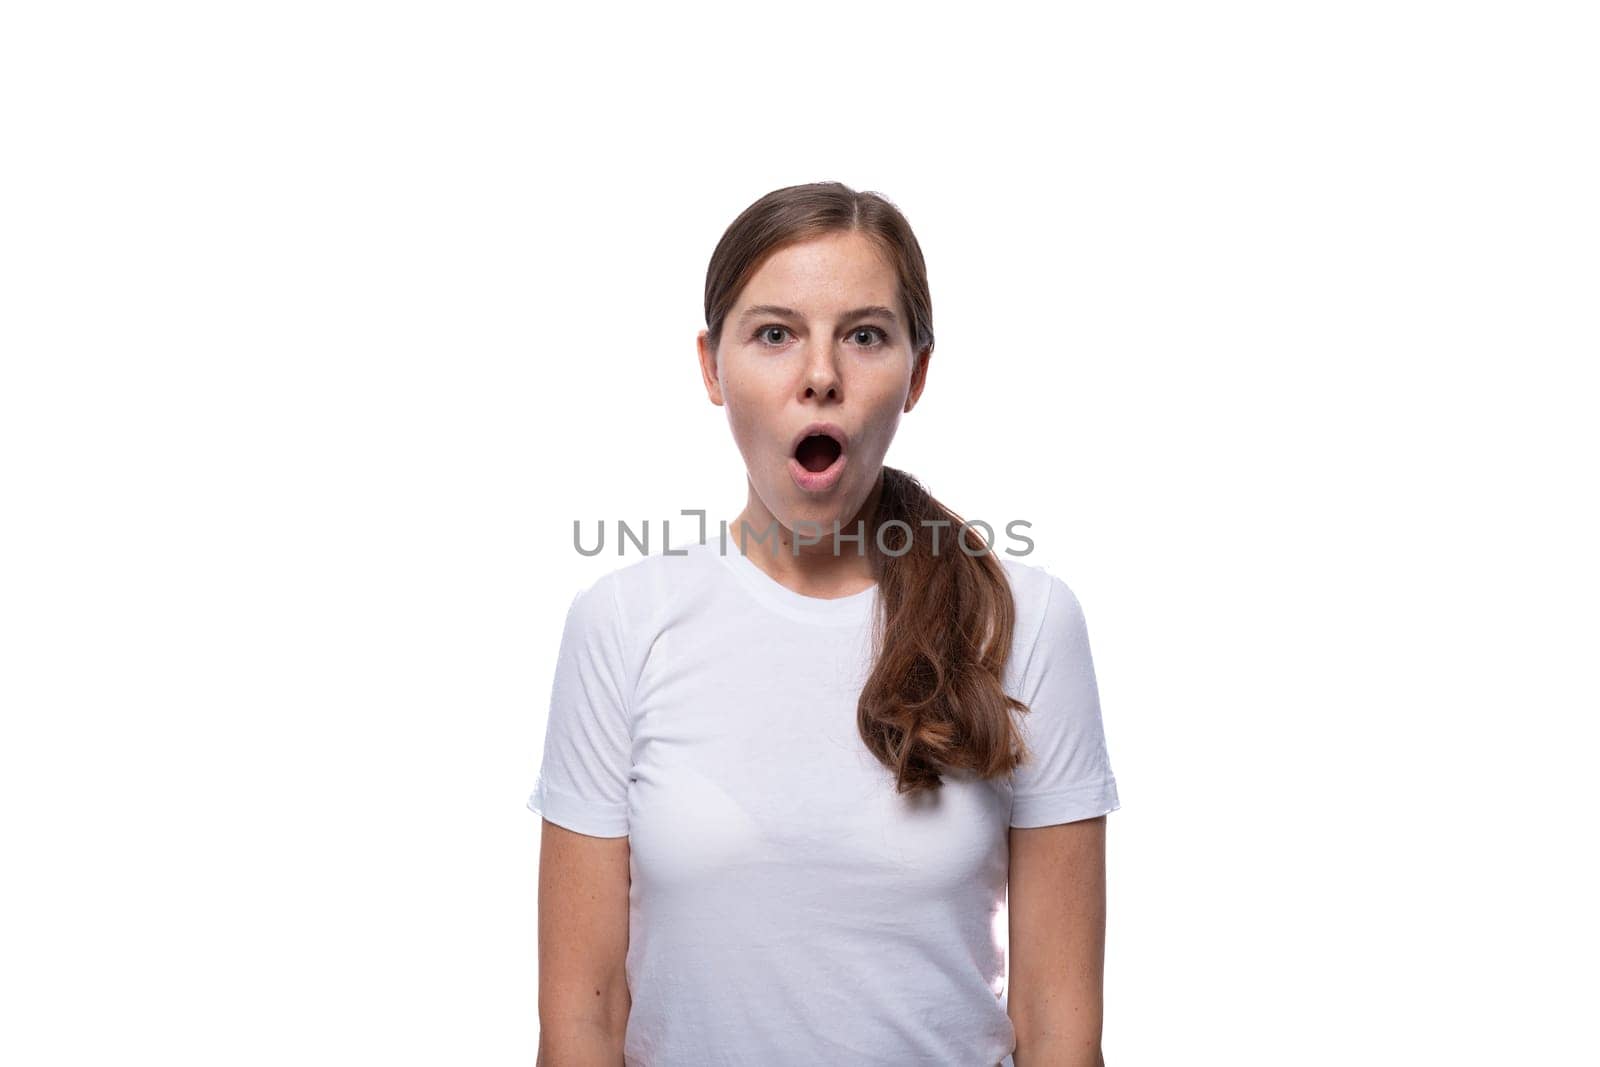 Young woman looks at the camera in surprise with her mouth open.